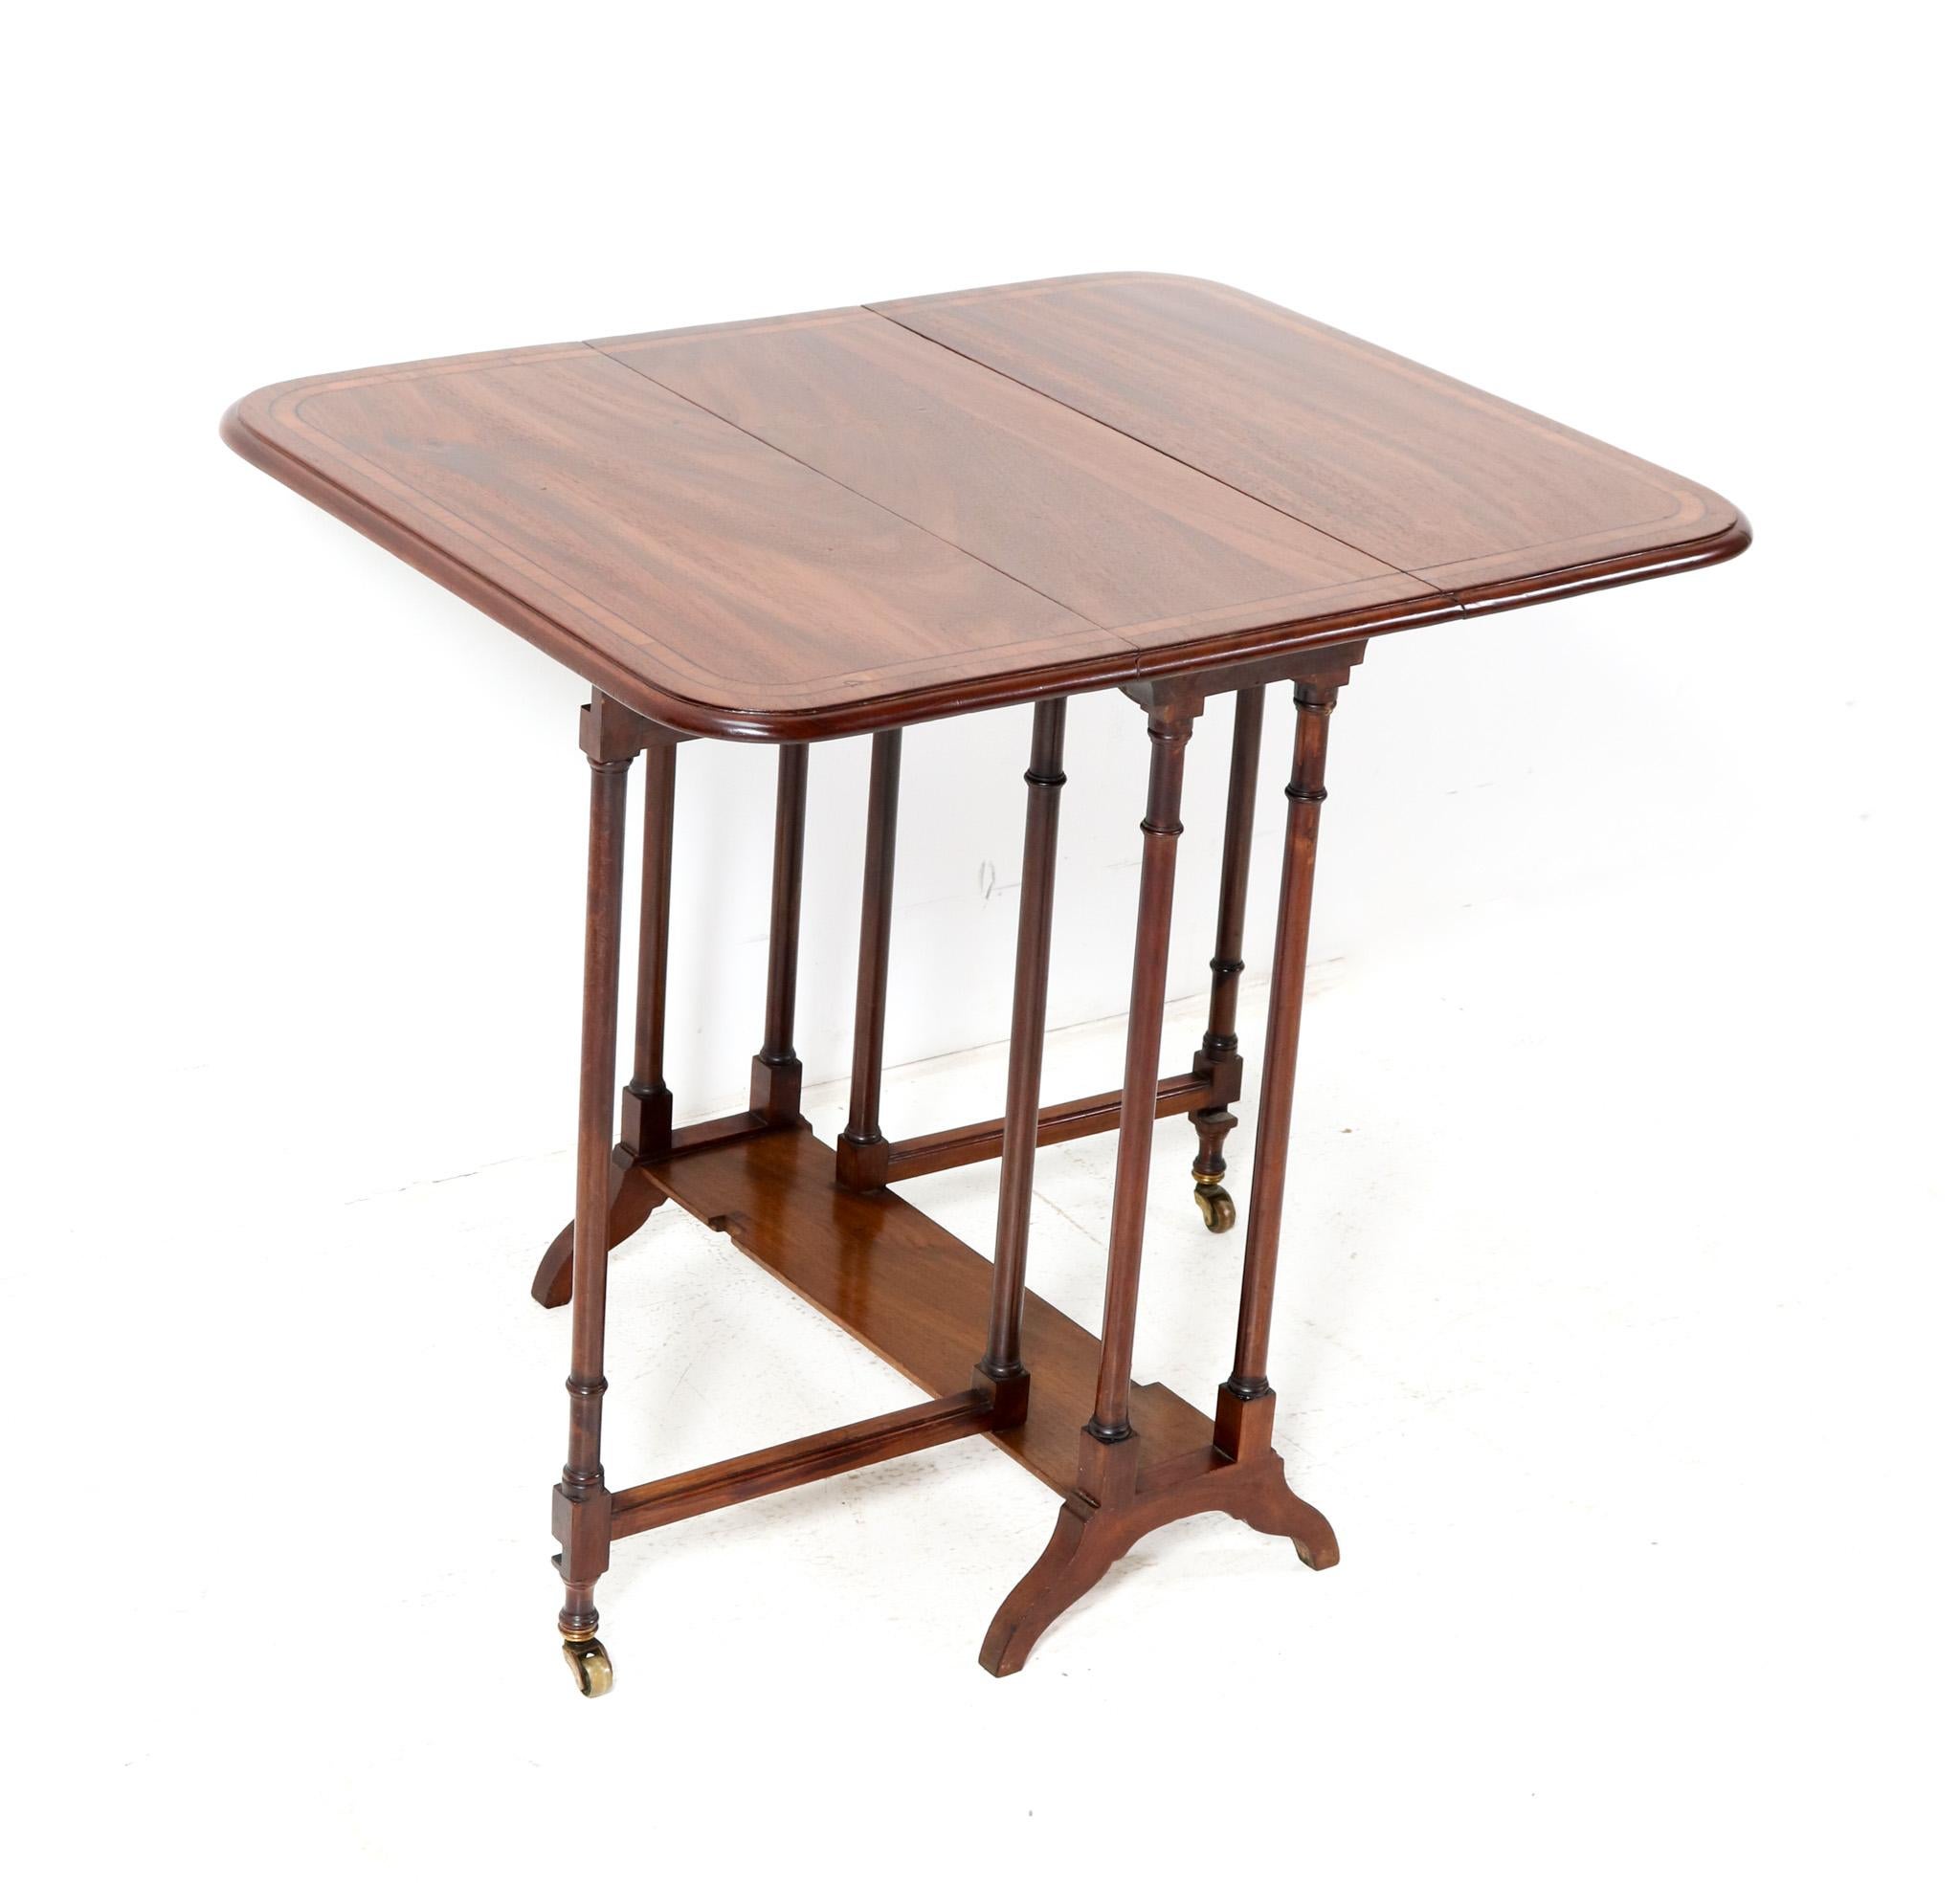 Stunning and elegant English 19th Century spider leg table with drop leaves.
Striking English design from the 1860s.
Solid walnut base with original solid walnut and inlay top.
The whole riding smoothly upon a set of six original brass castors.
This